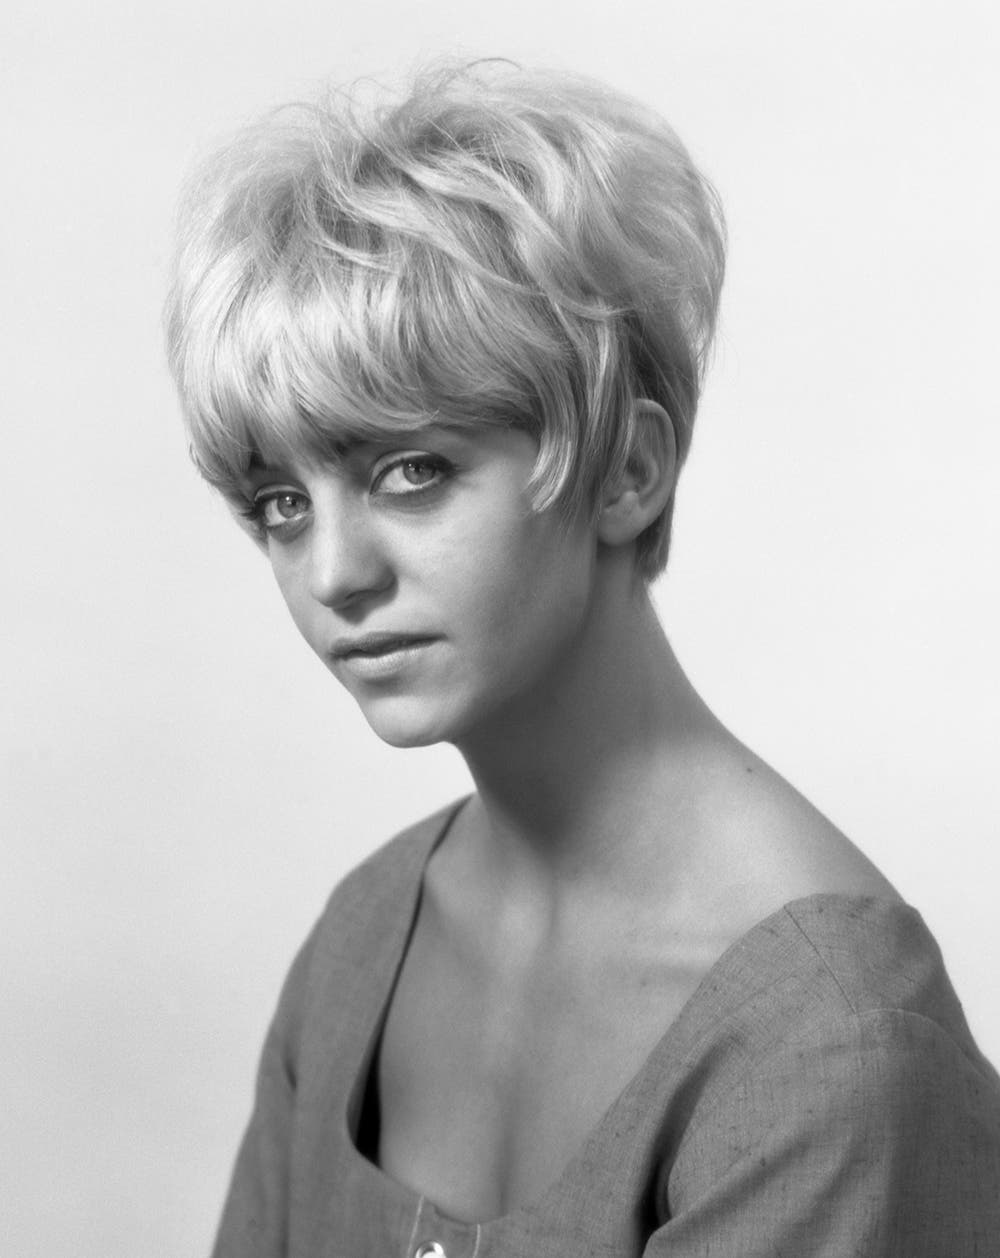 Stunning American actress Goldie Hawn and her life's work in movies